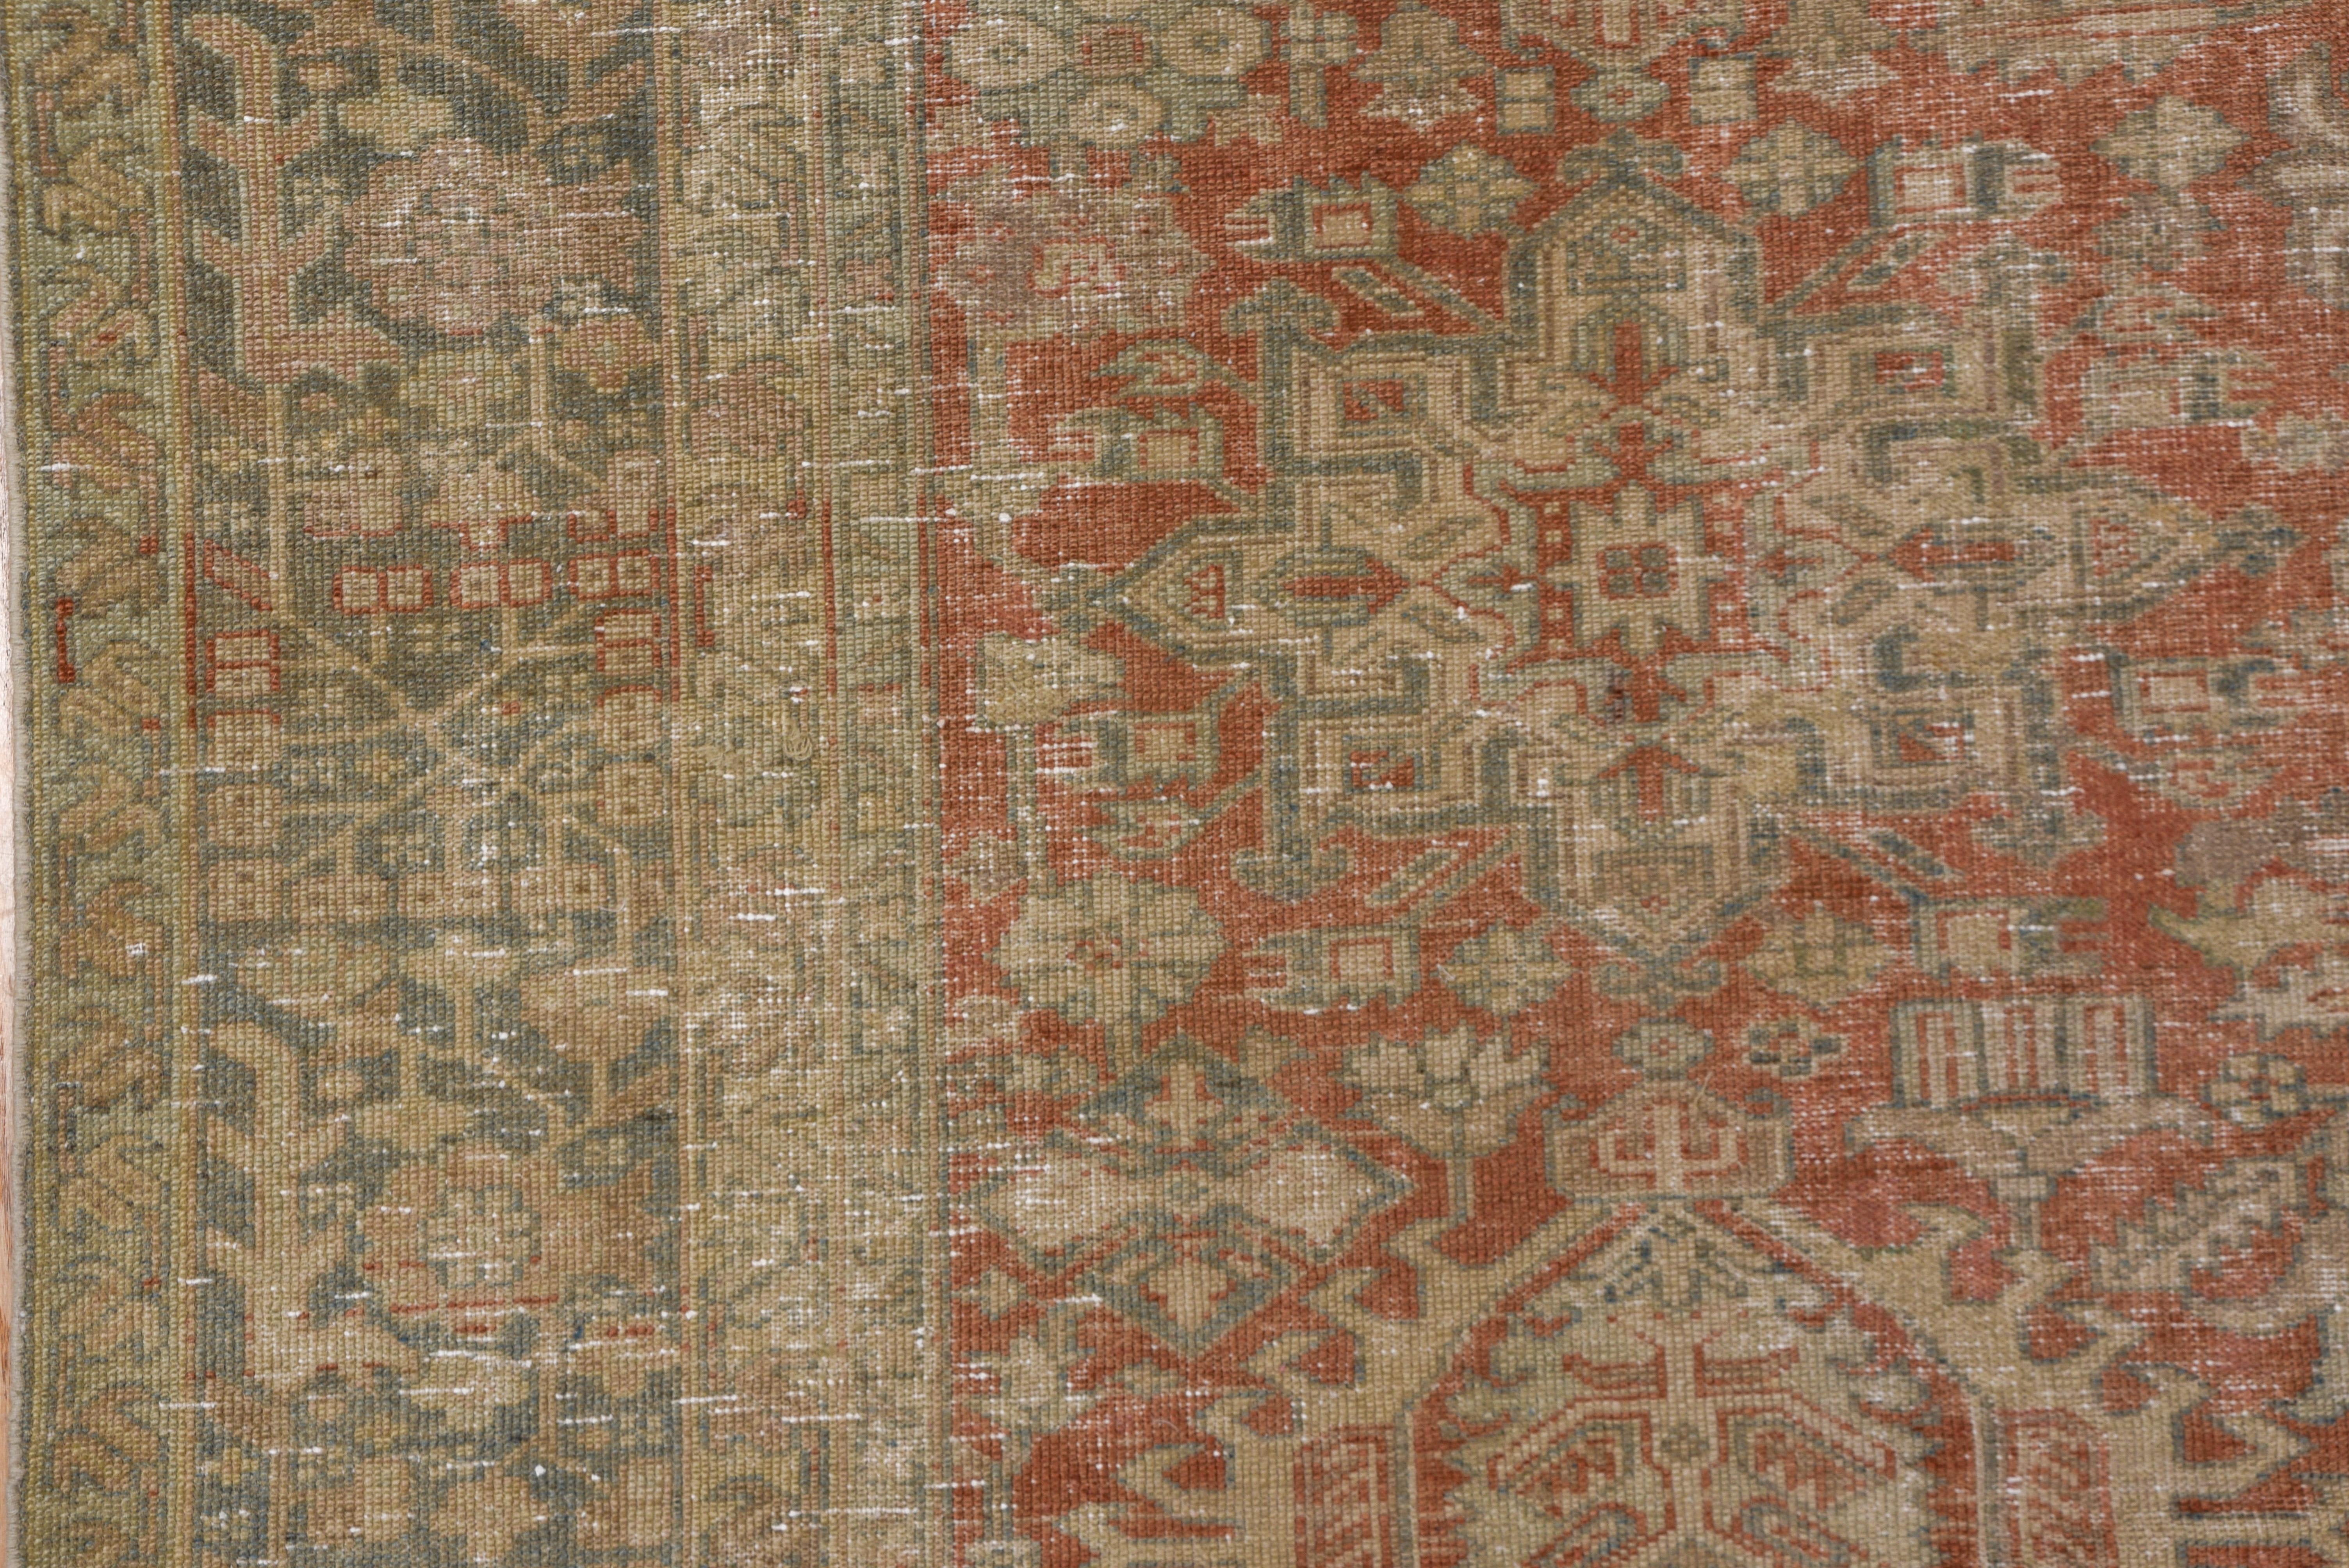 Karaje Rugs are woven in the Northwest region of Iran. They’re known for their durable wool quality, and geometric designs. They have a heavy influence on the geometry of Caucasian rugs of Caucasus which is just North of Iran. All Caucasian rugs are